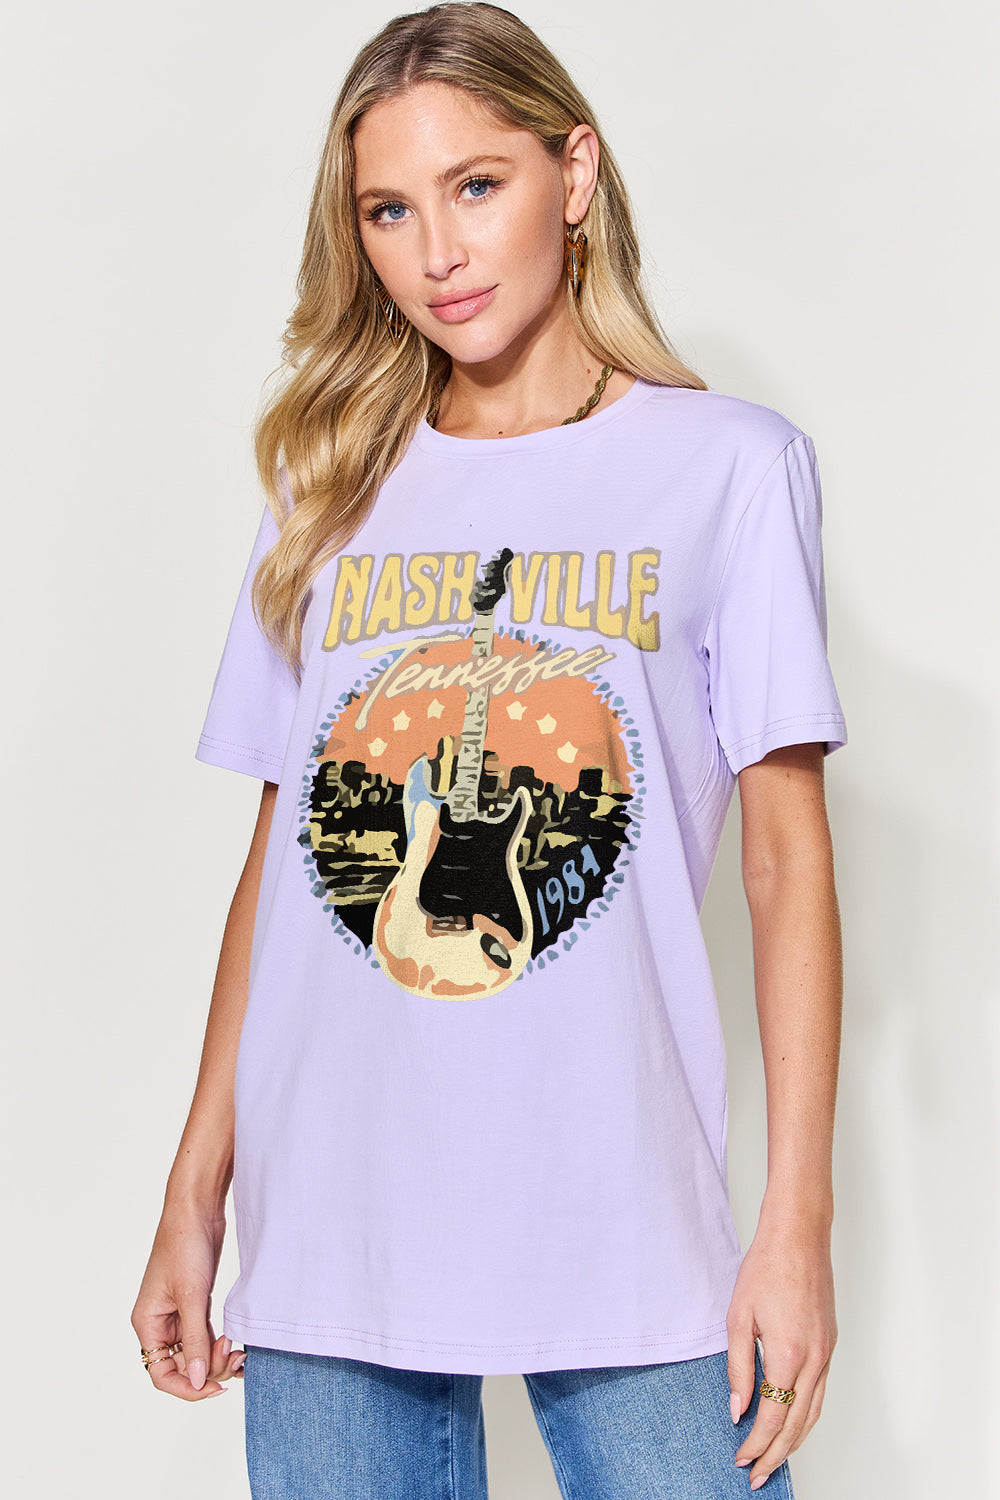 Simply Love Full Size Graphic Round Neck Short Sleeve T-Shirt (8 Colors) Shirts & Tops Krazy Heart Designs Boutique Lavender S 